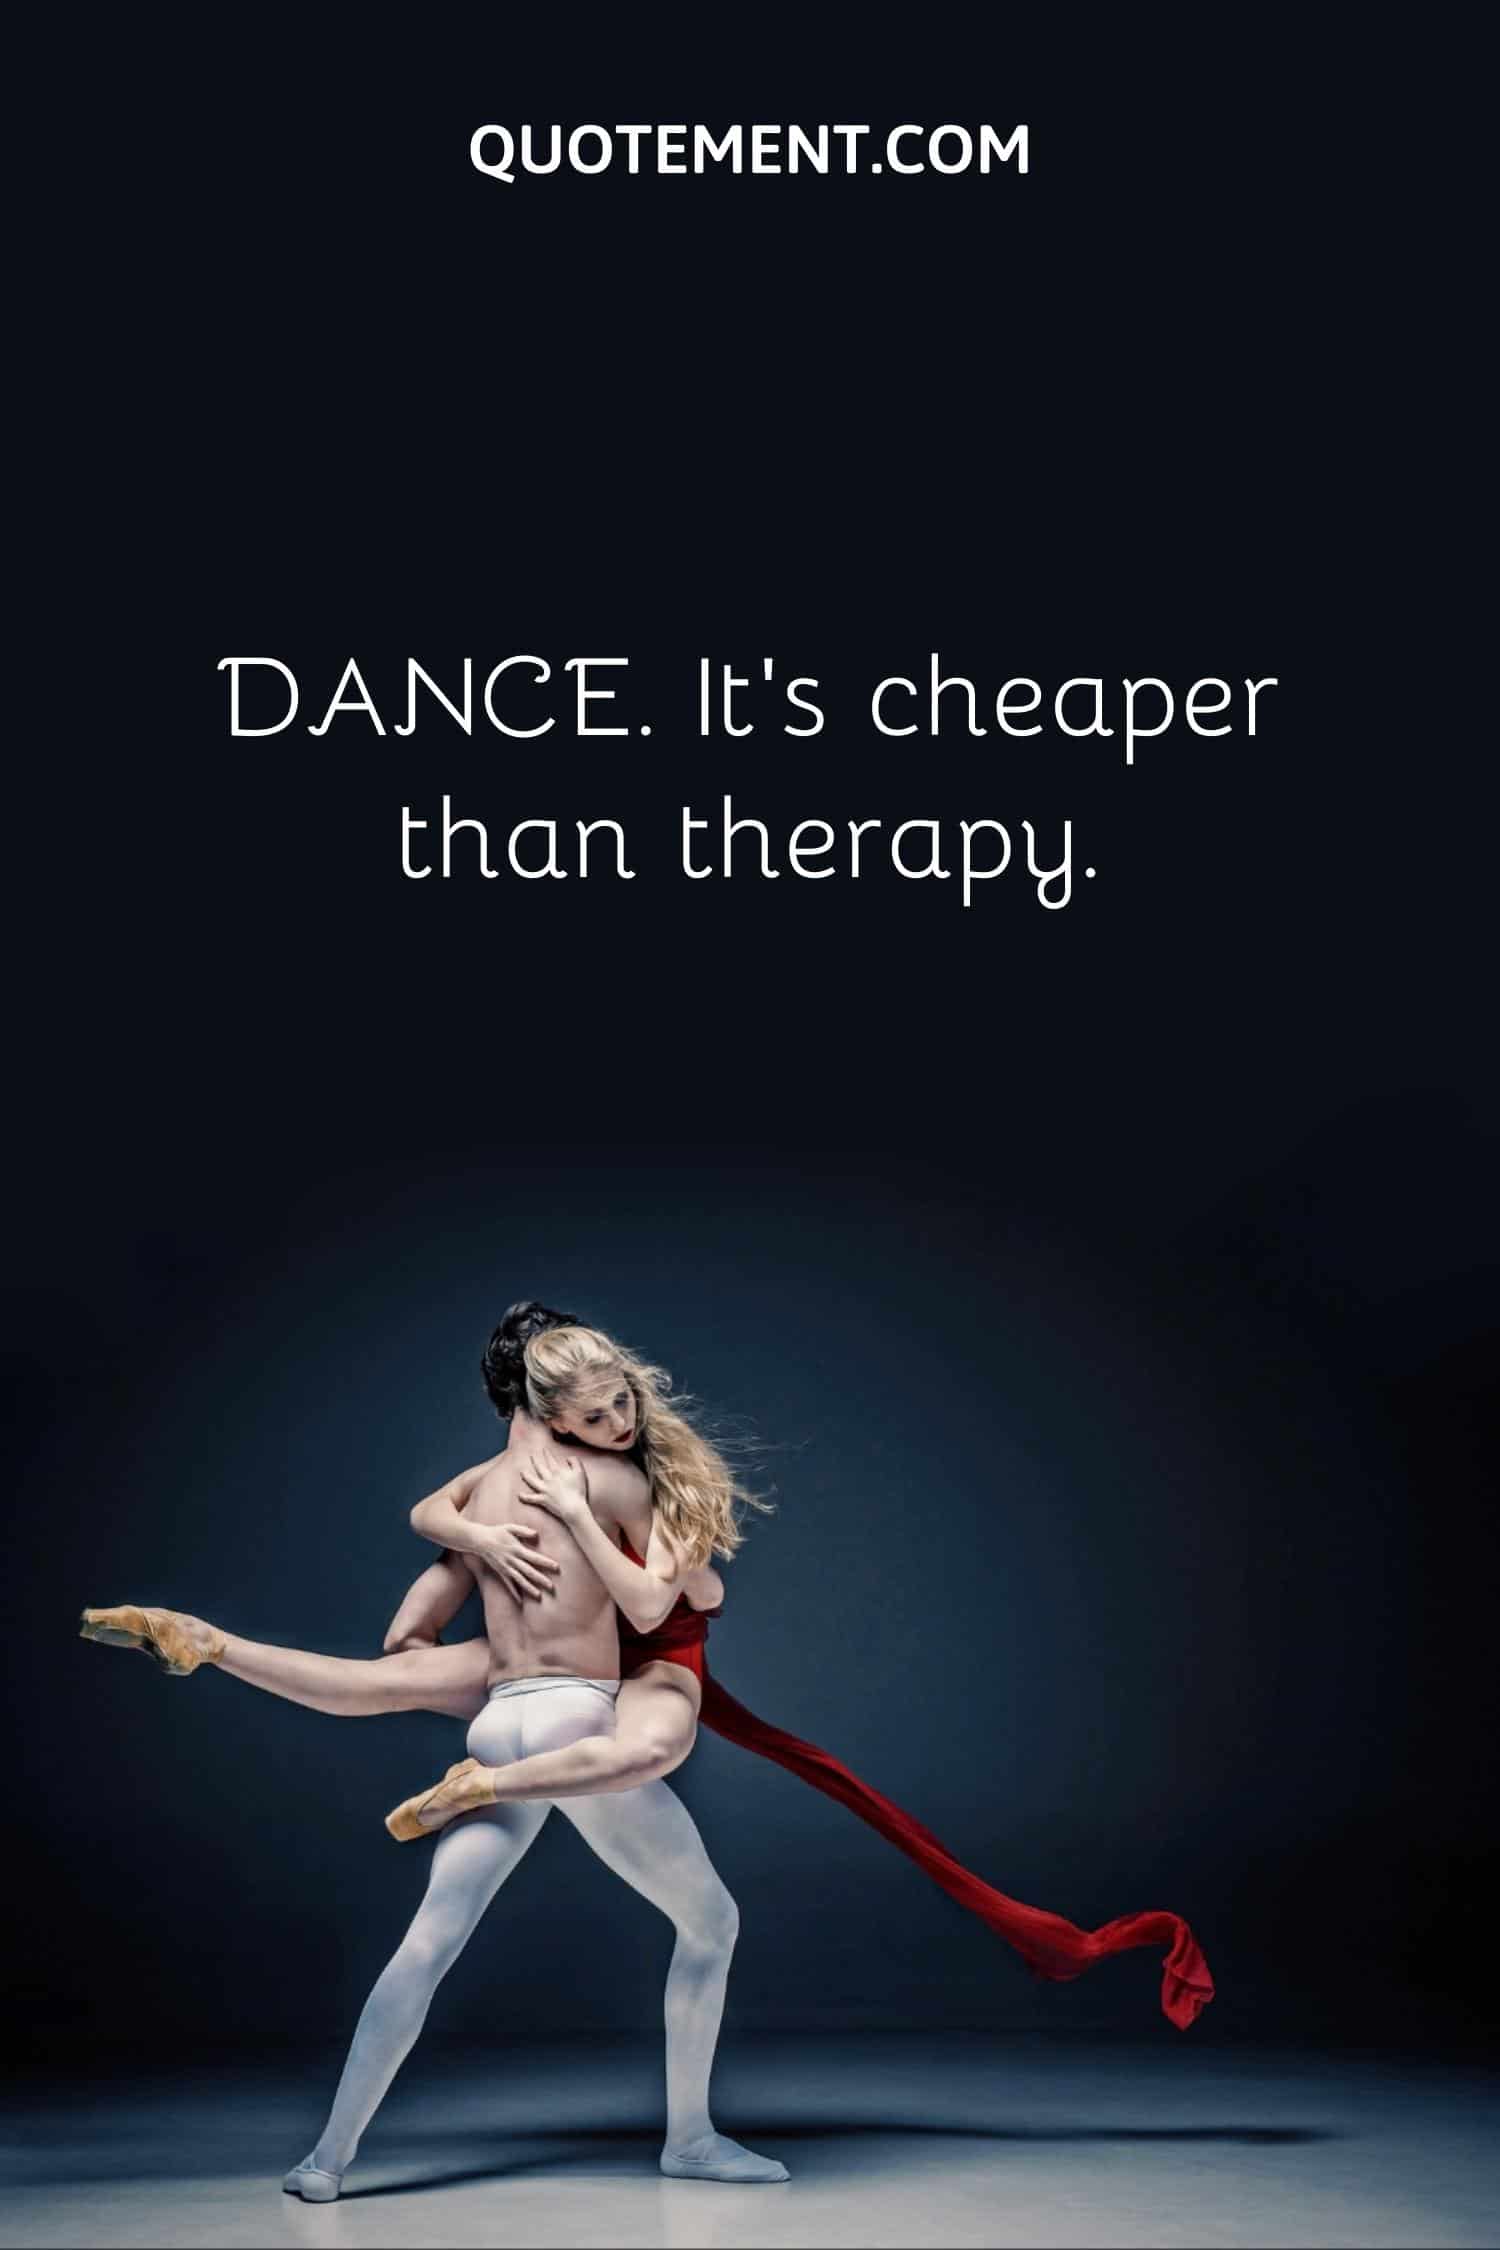 DANCE. It’s cheaper than therapy